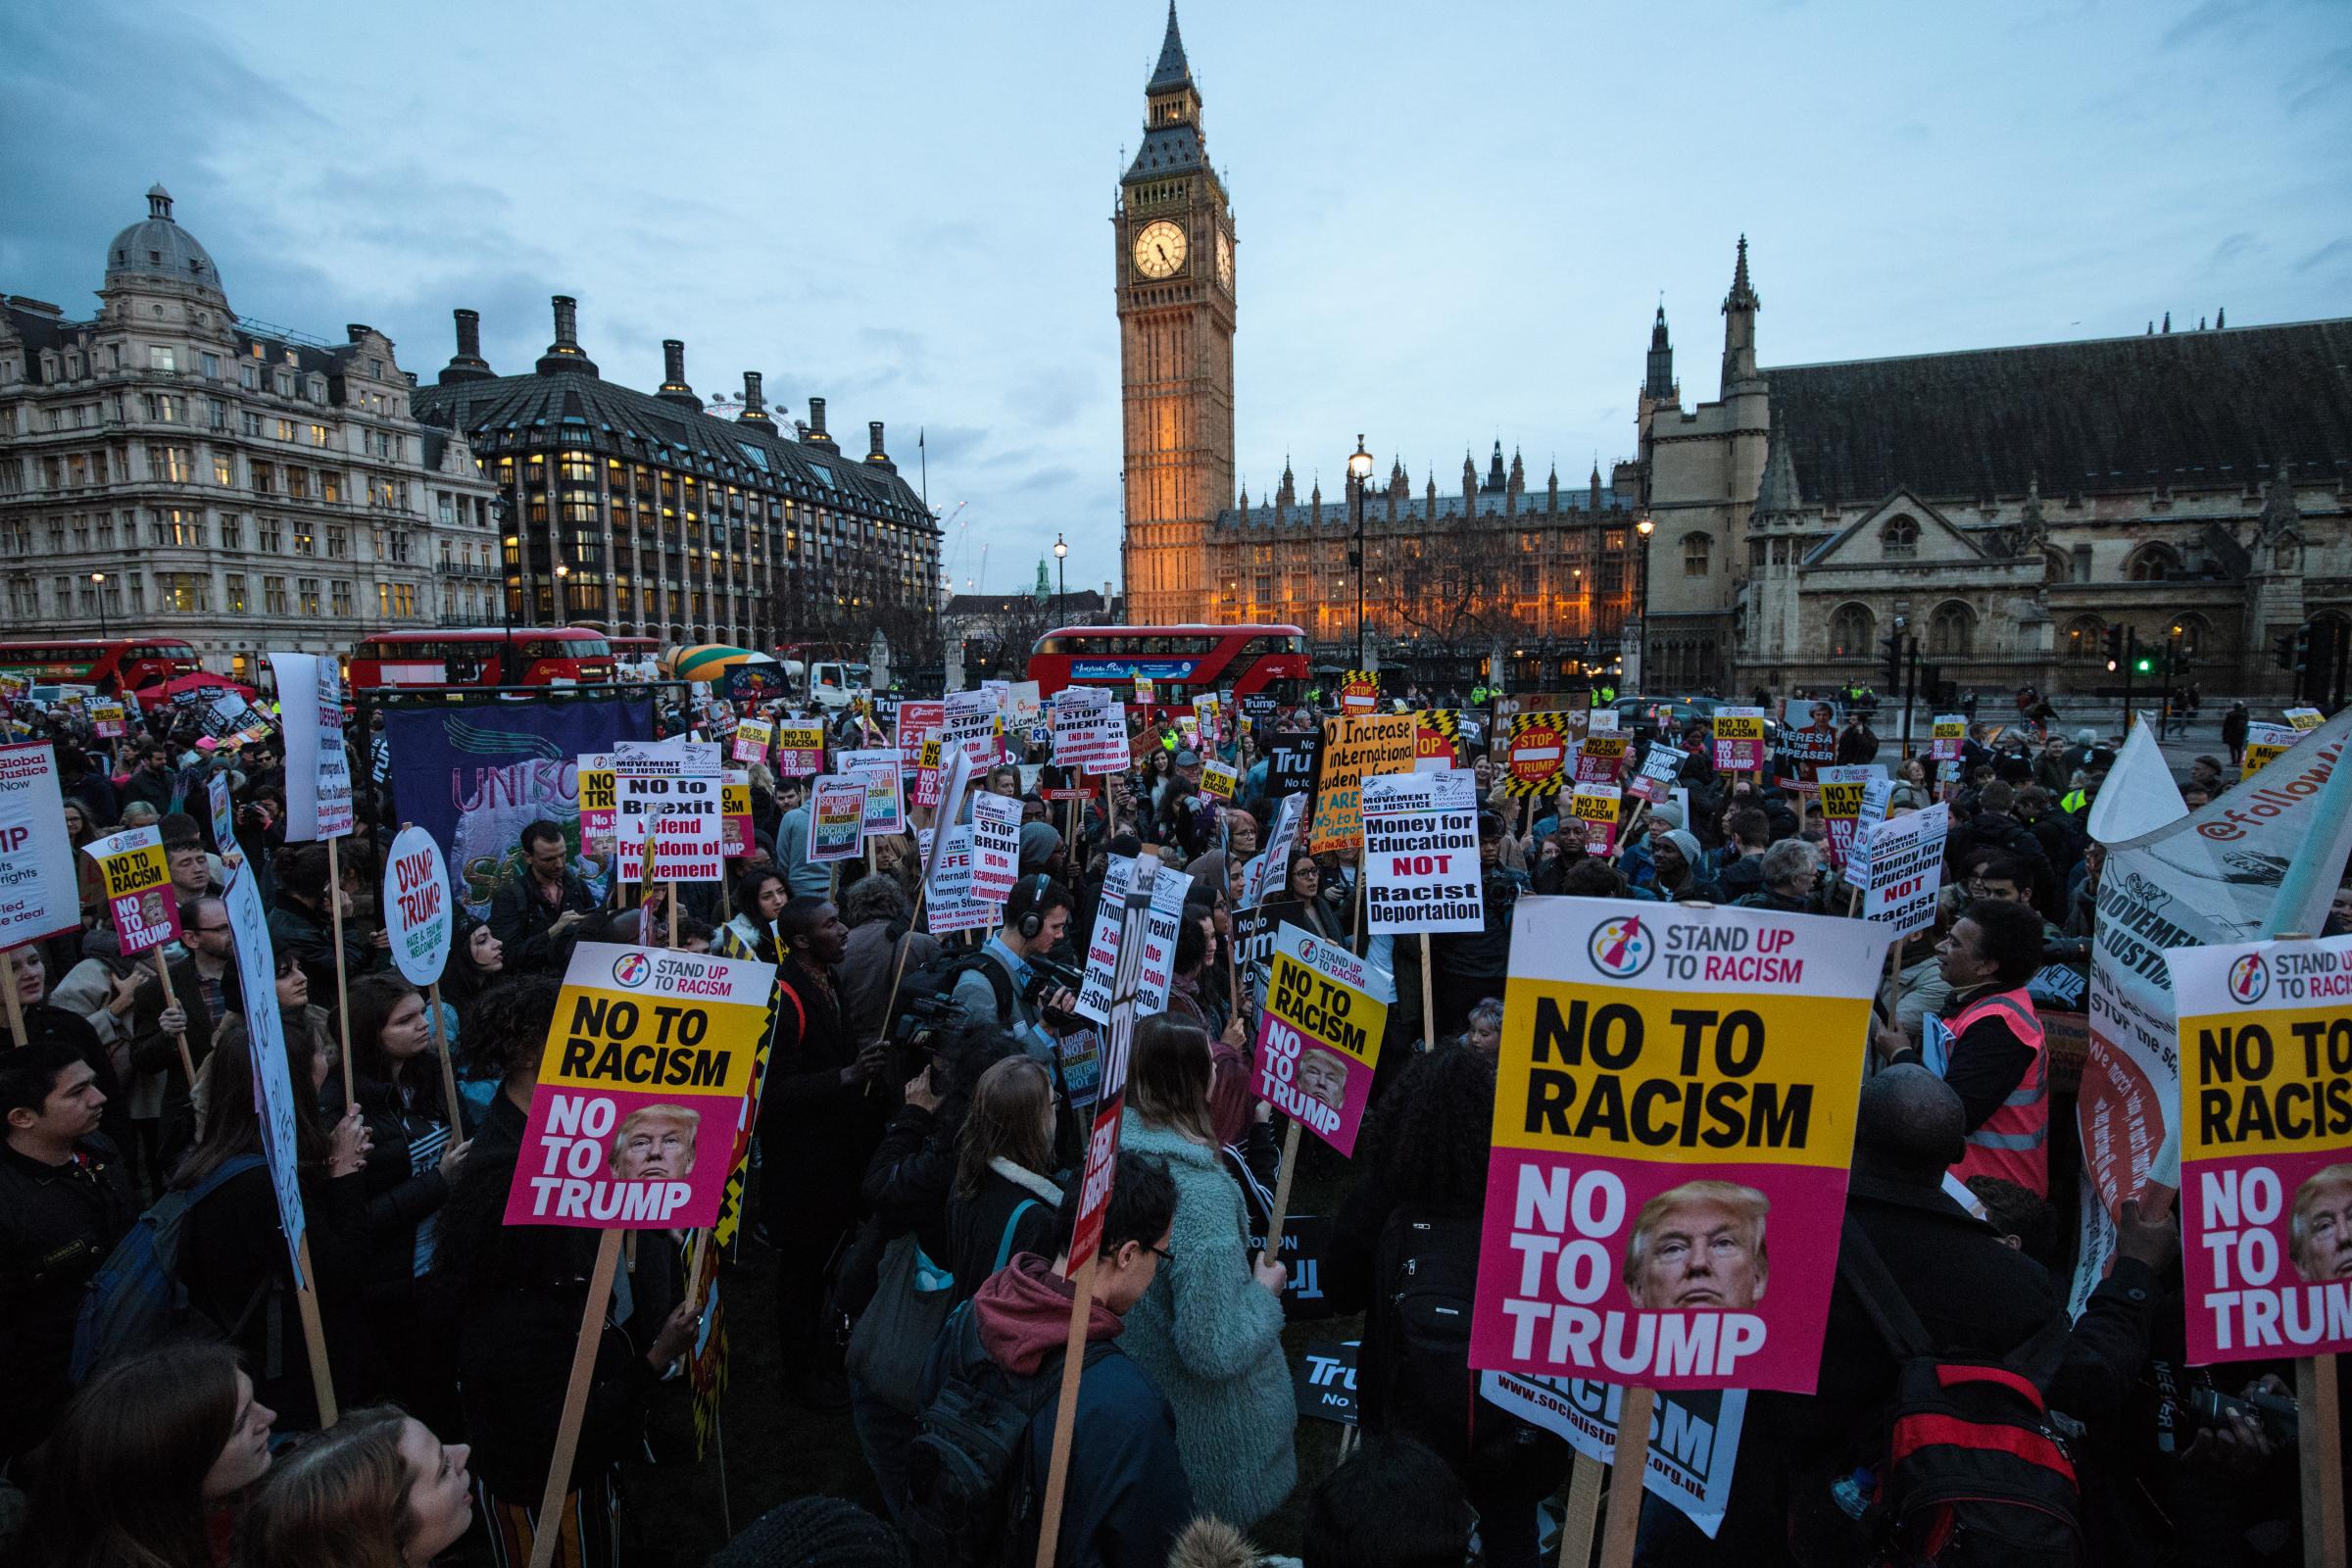 Stop Trump Protesters Demonstrate As MPs Debate State Visit Petition